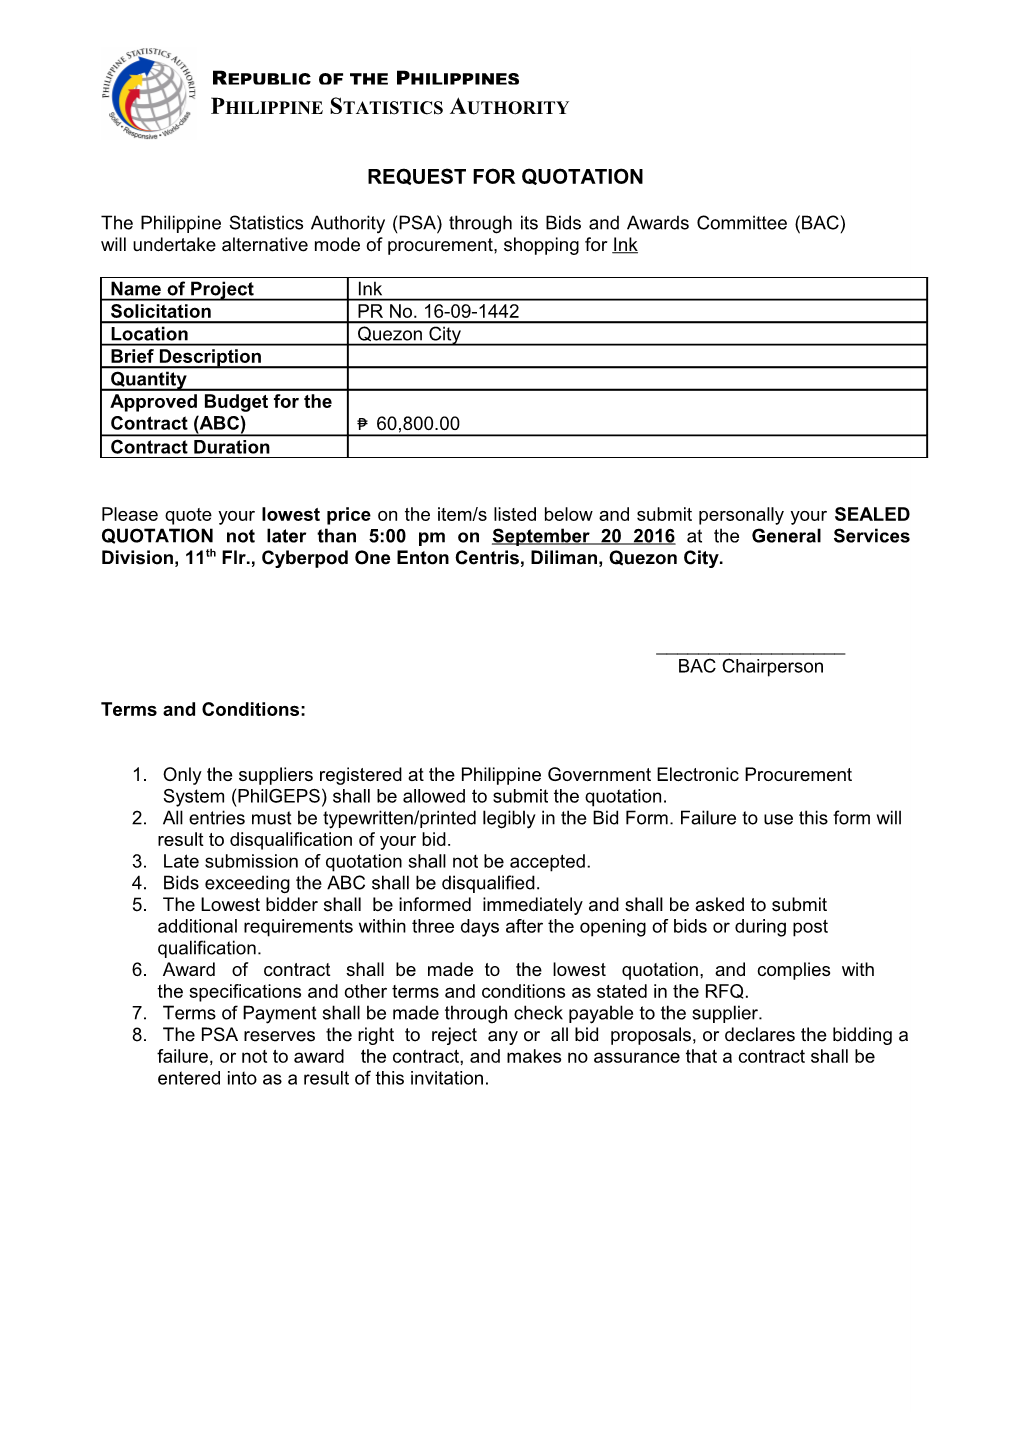 Request for Quotation s45